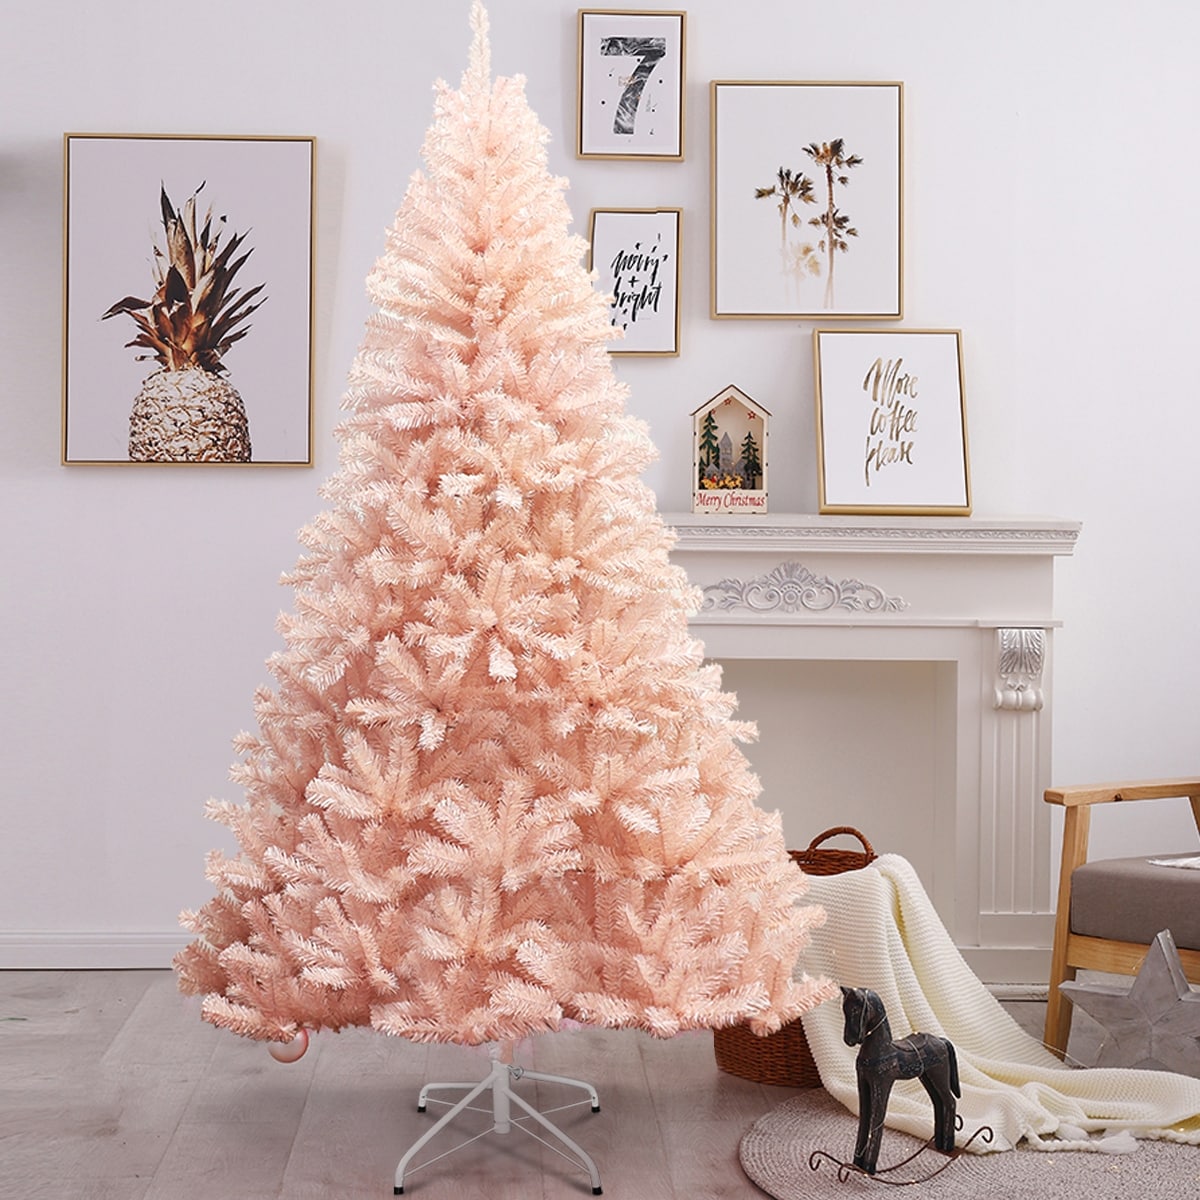 https://ak1.ostkcdn.com/images/products/is/images/direct/8a607a9e0e9184d4578688e0f34a775bee152fd3/Artificial-Pink-Christmas-Tree-PVC-with-Metal-Stand.jpg